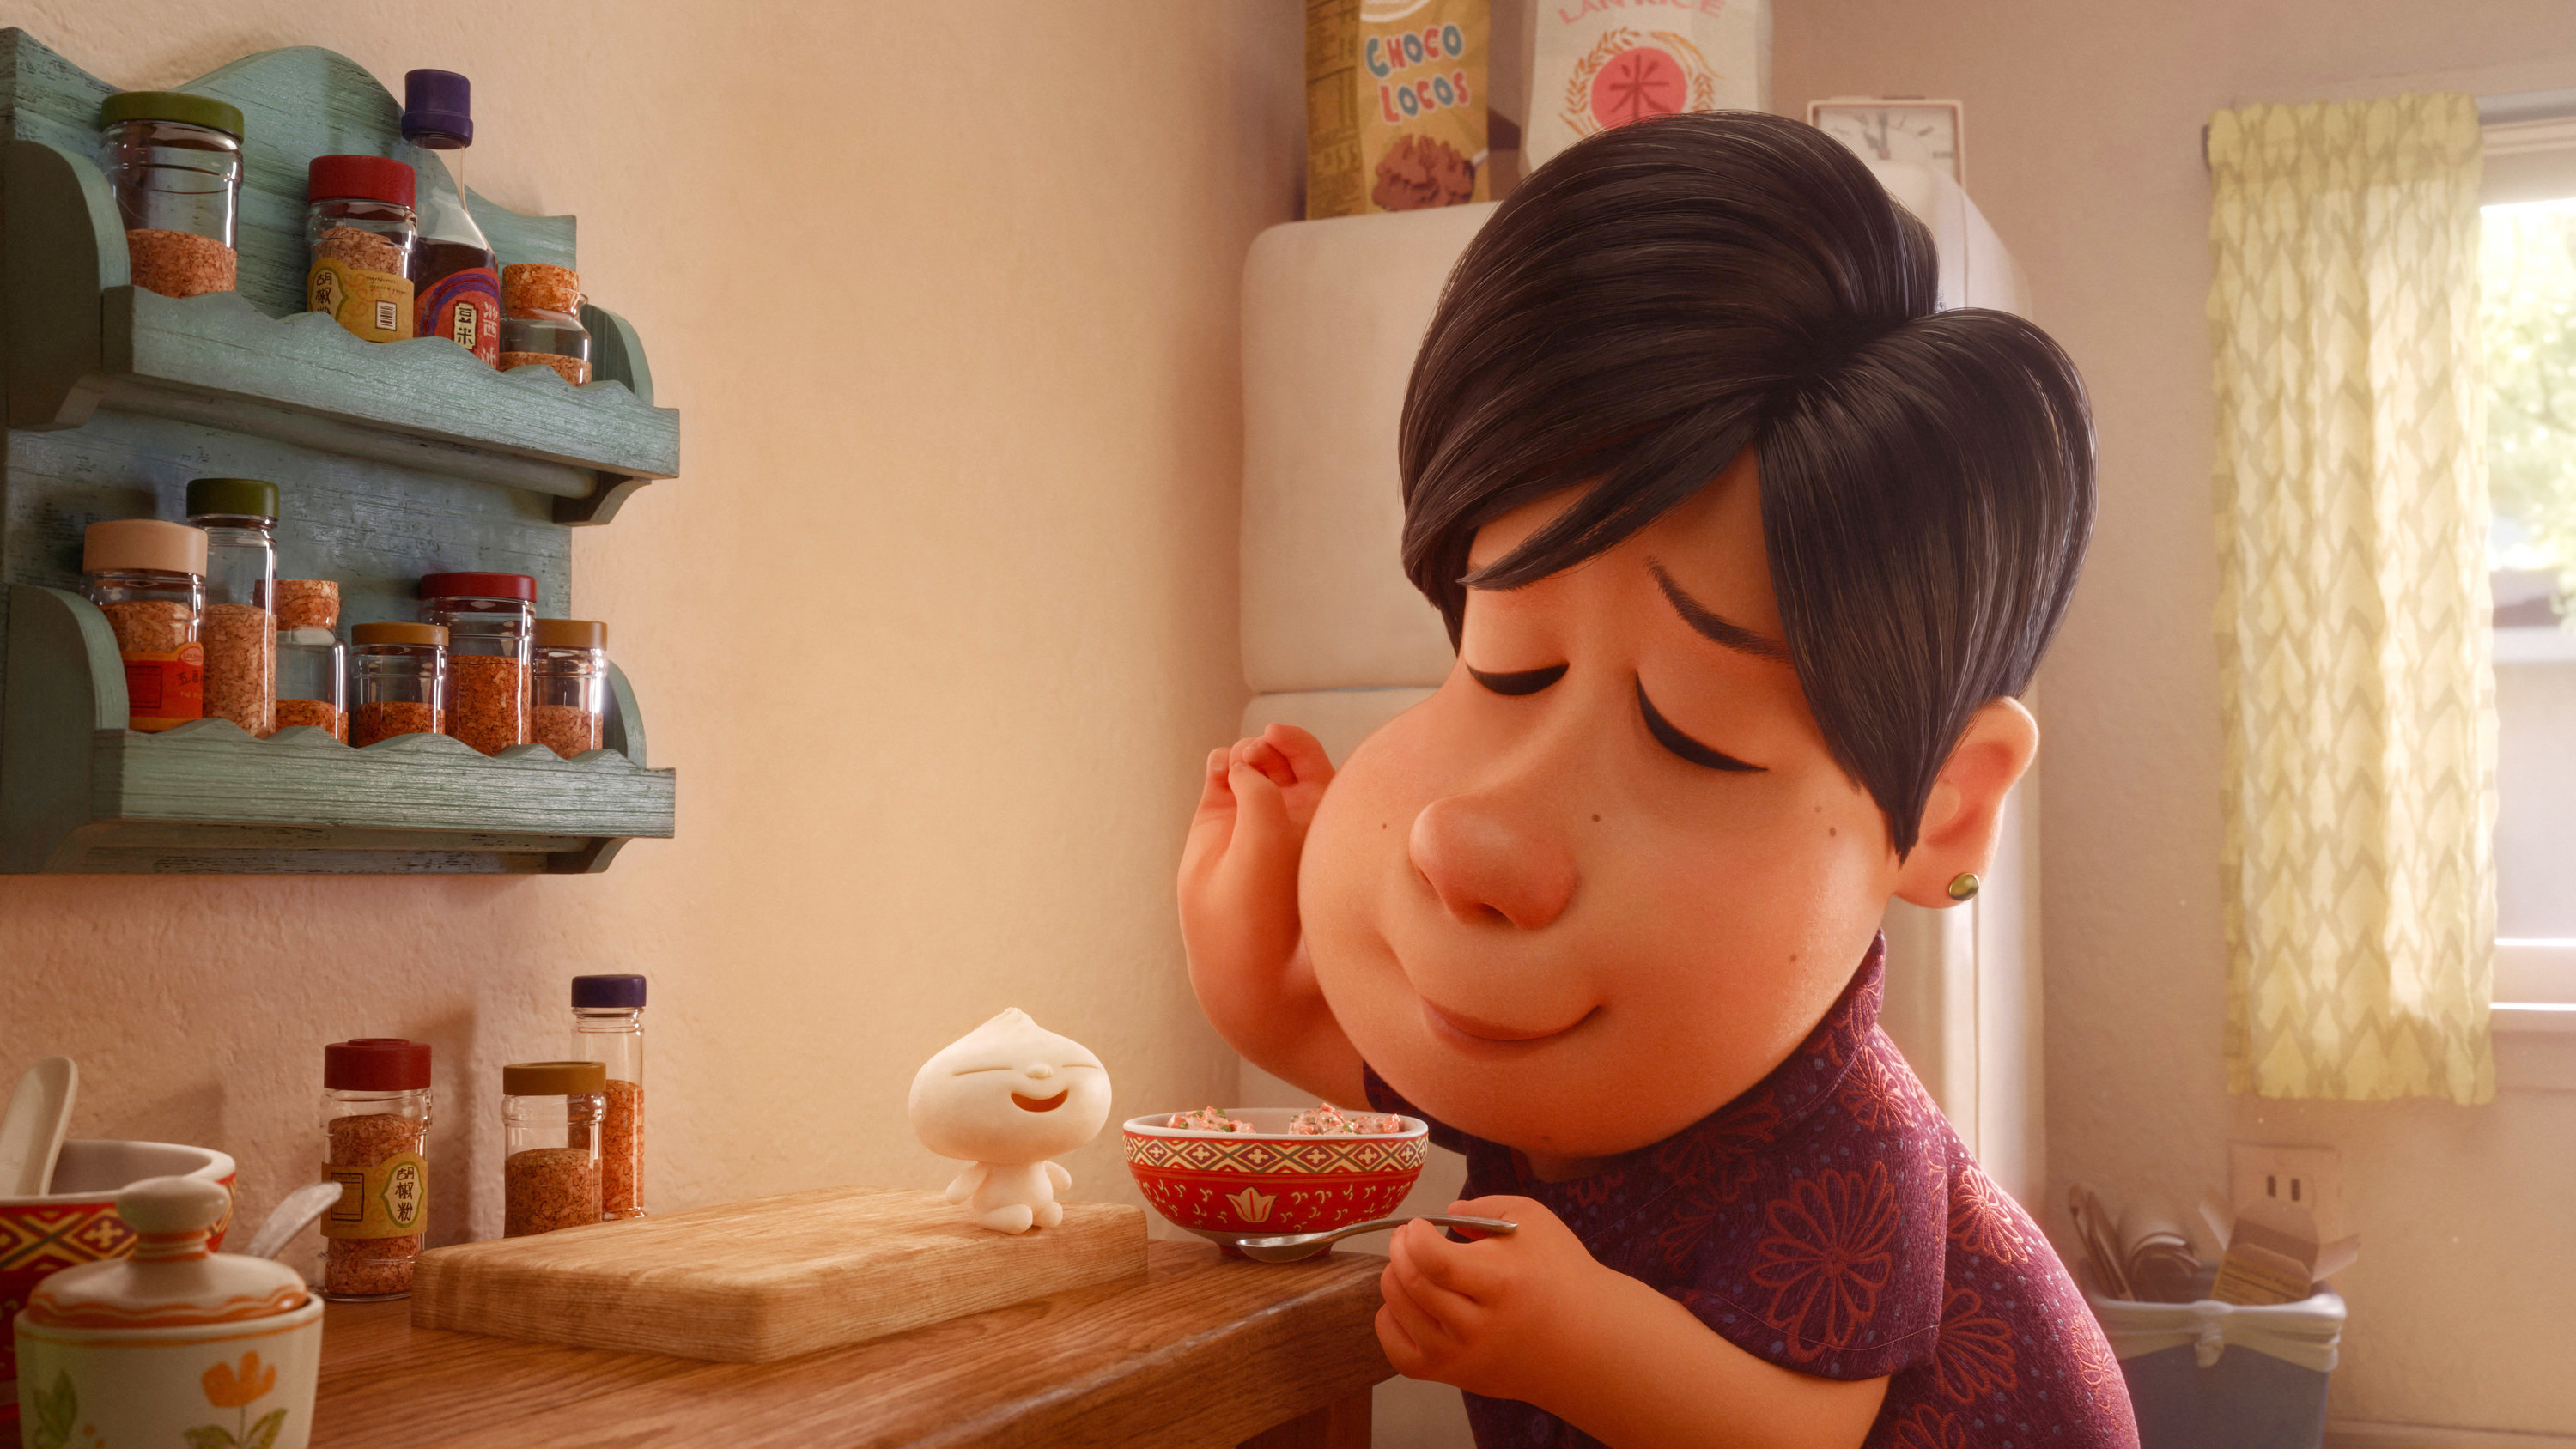 A still from Bao, of the mother cooking with the living dumpling